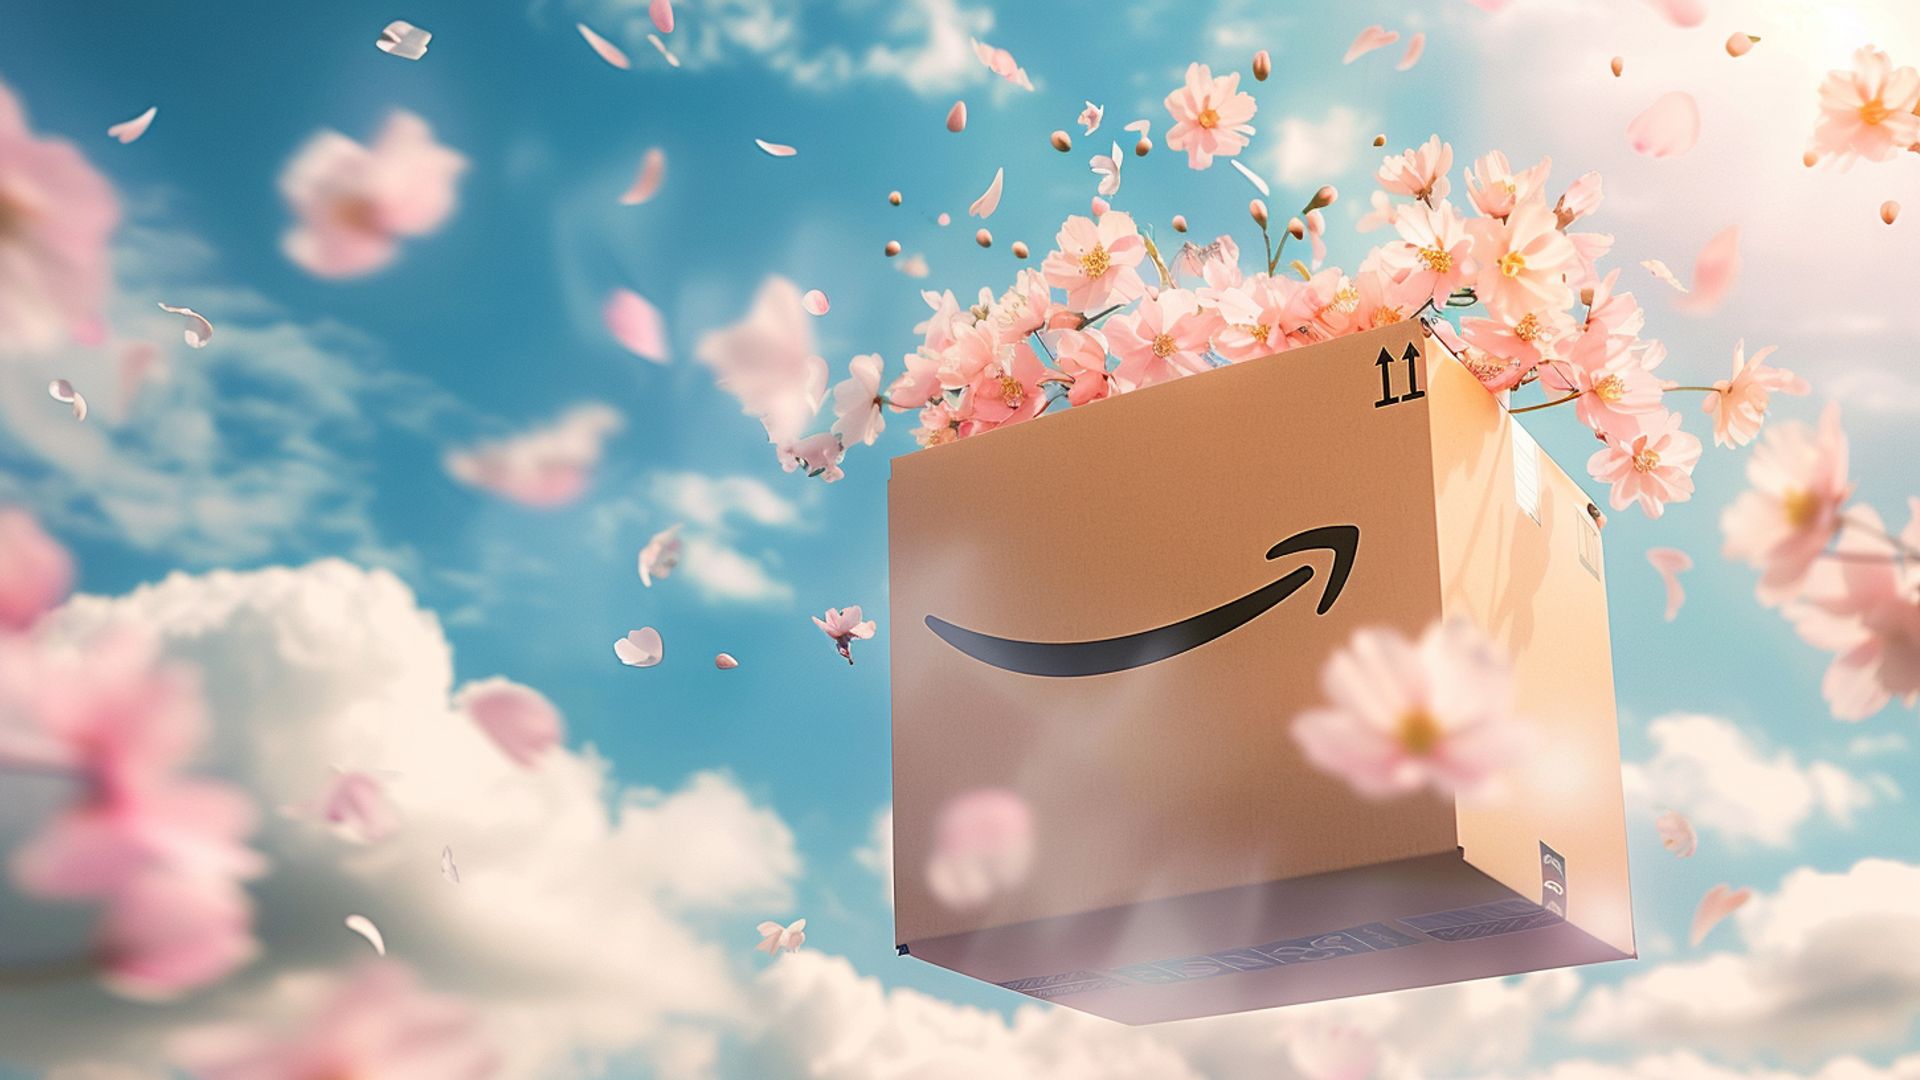 An Amazon box with the logo clearly visible, floating in the sky wit spring blooms spilling out of the box